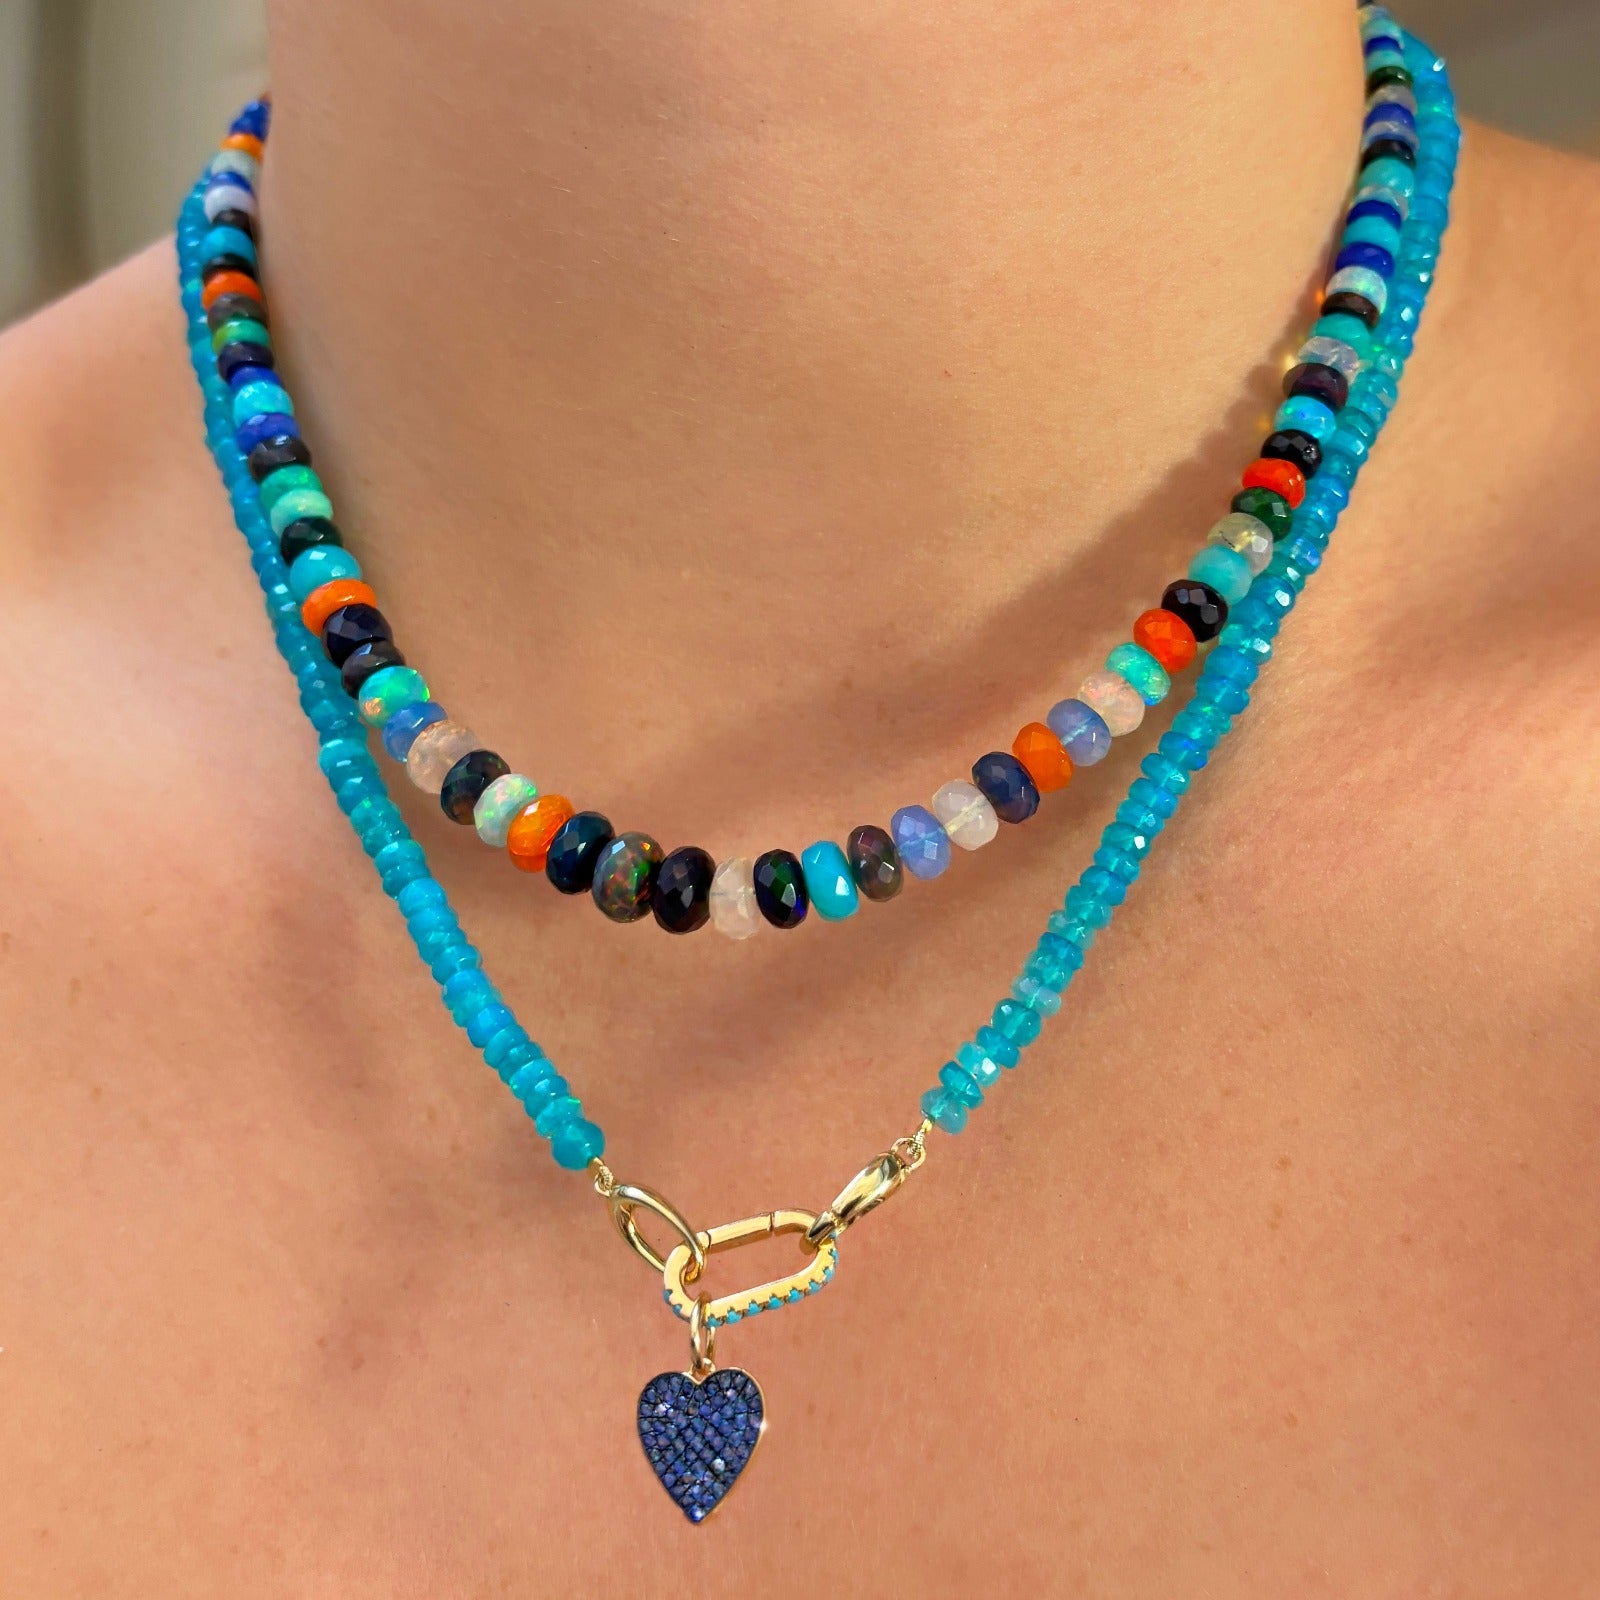 Shimmering beaded necklace made of faceted opals in shades of bright light blue on a gold linking ovals clasp. Styled on a neck layered with a small turquoise charm and medium pave heart charm.